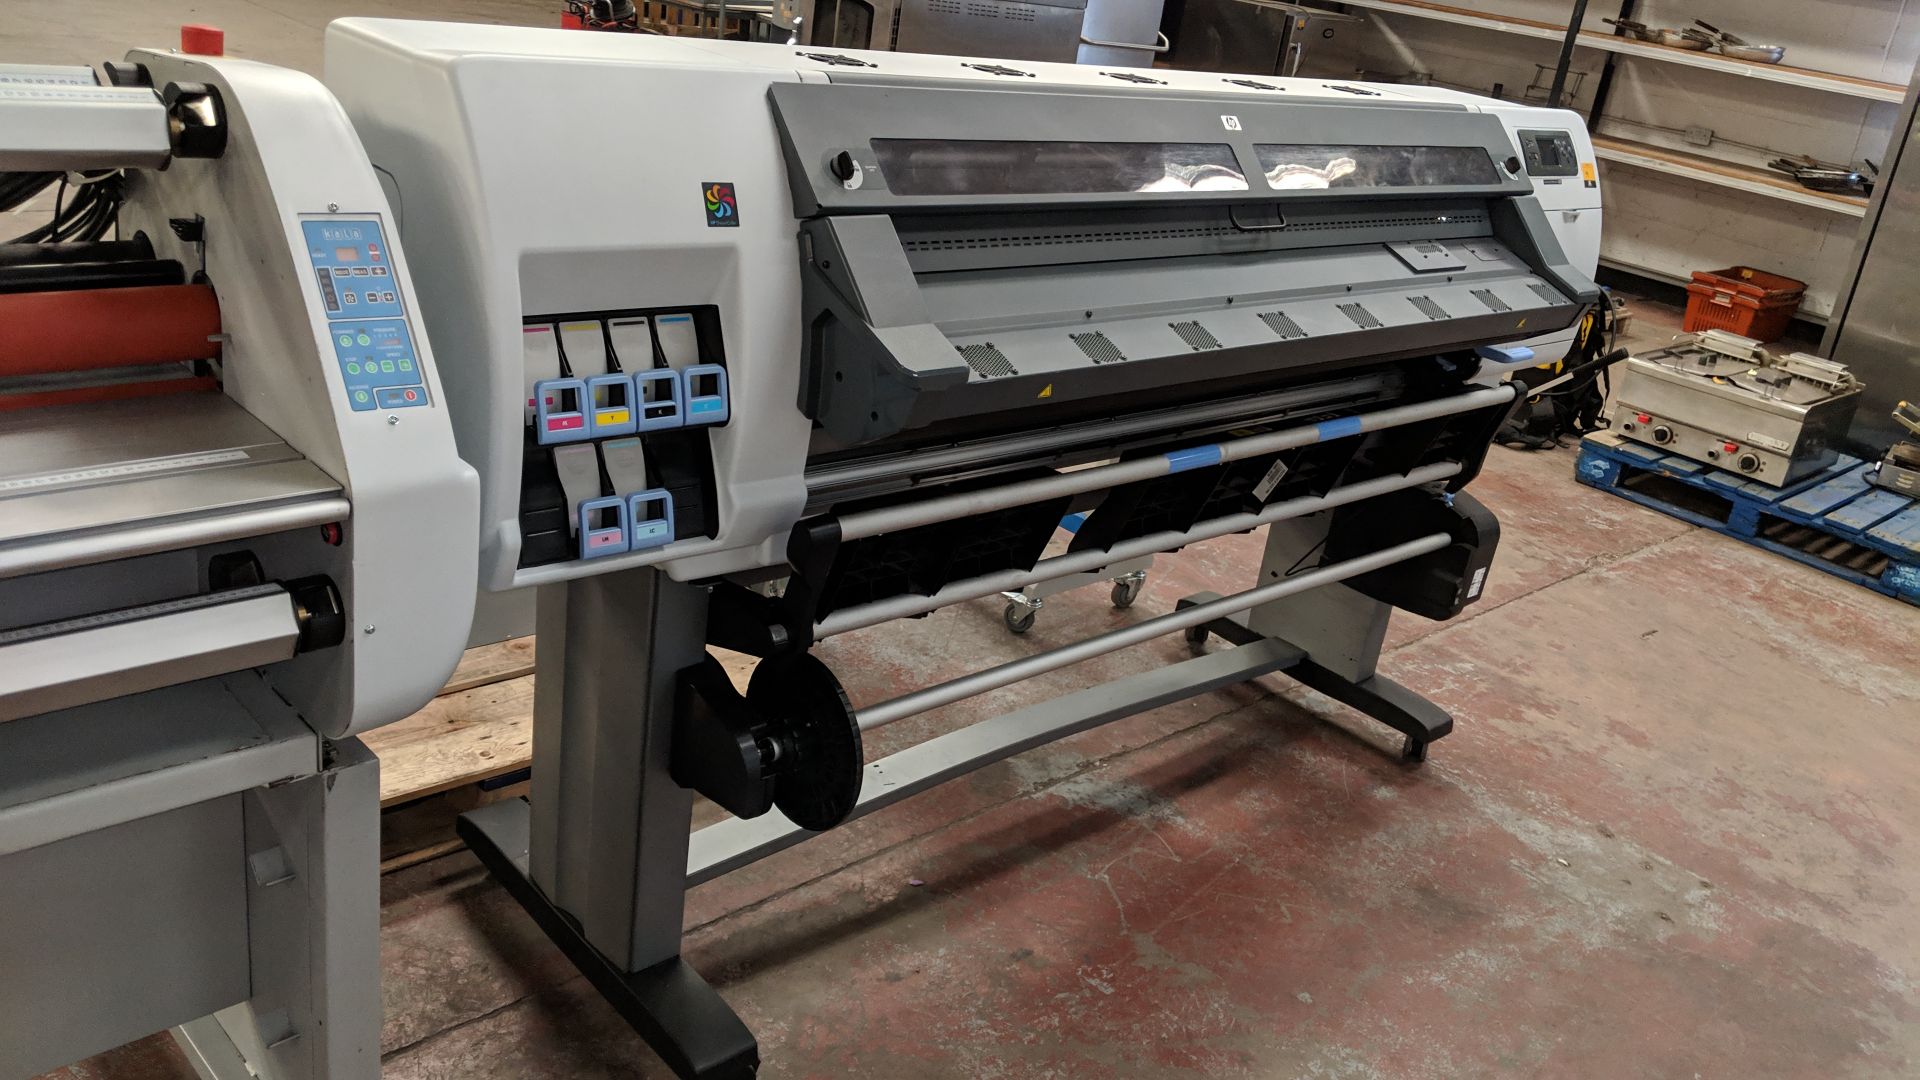 HP DesignJet L25500 wide format printer, product code CH956A, 60 inch capacity IMPORTANT: Please